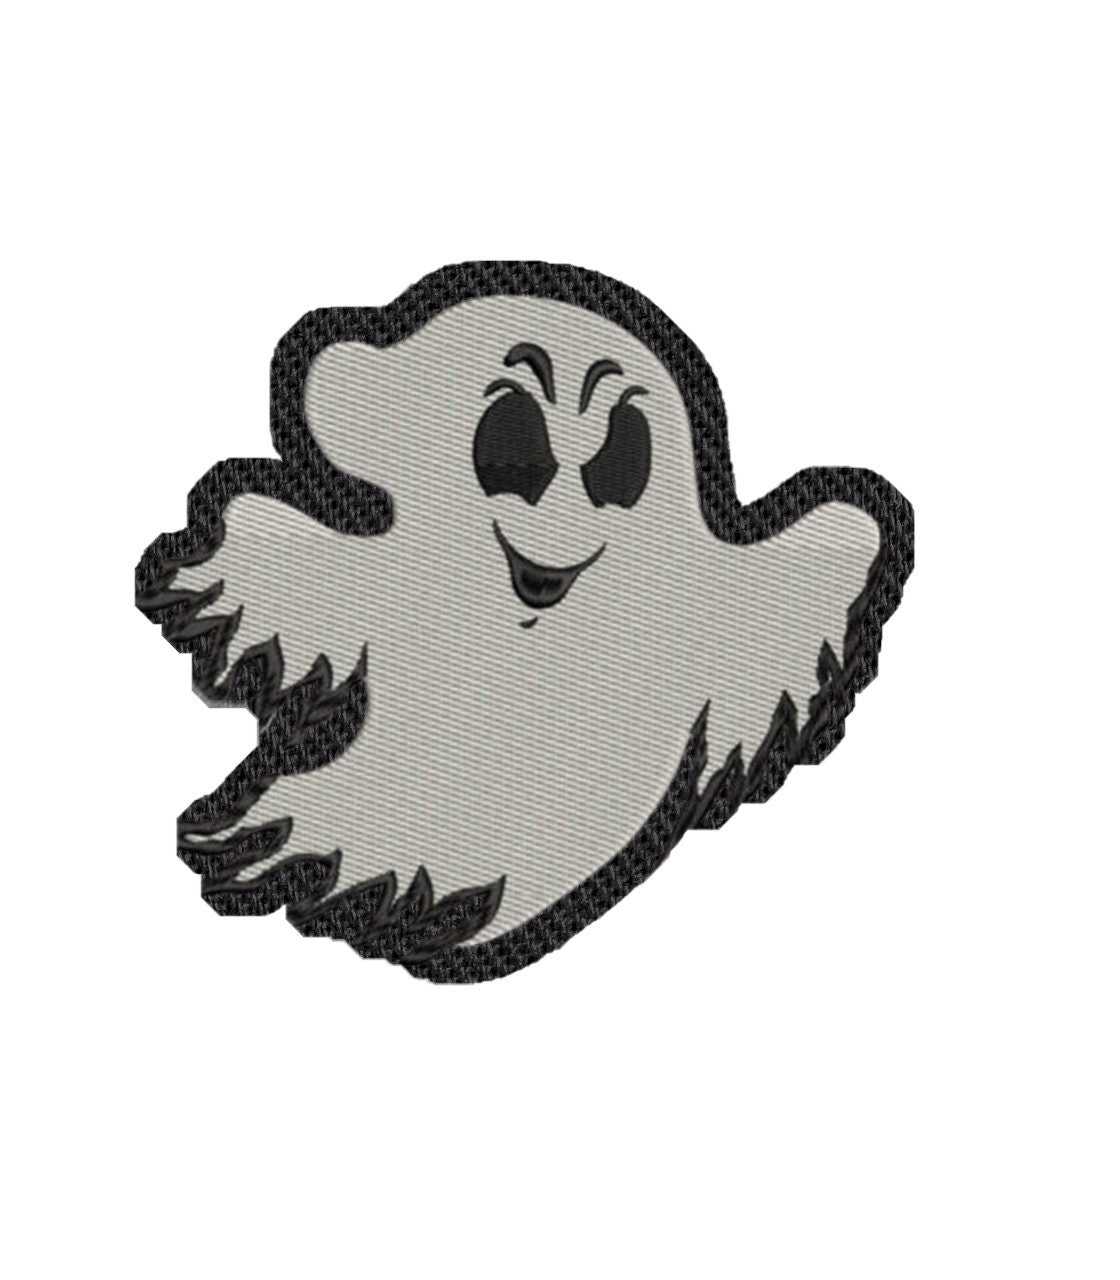 Halloween Ghost Iron on Patch / Sew on embroidered patches - Celebrations Halloween Embroidery Women Applique Merit for Clothing Jacket